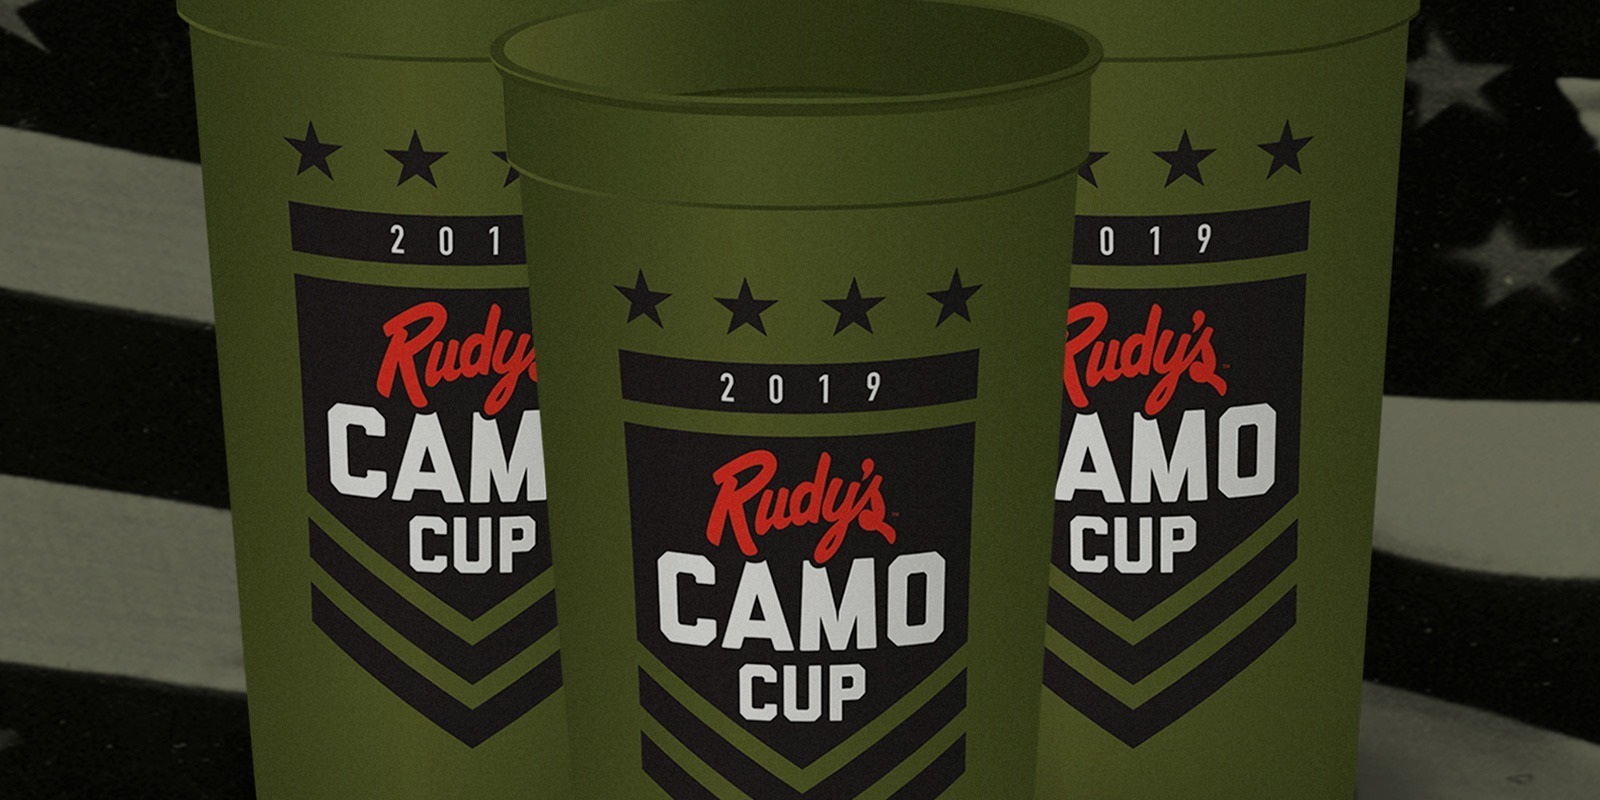 Rudy’s Camo Cup for a Cause